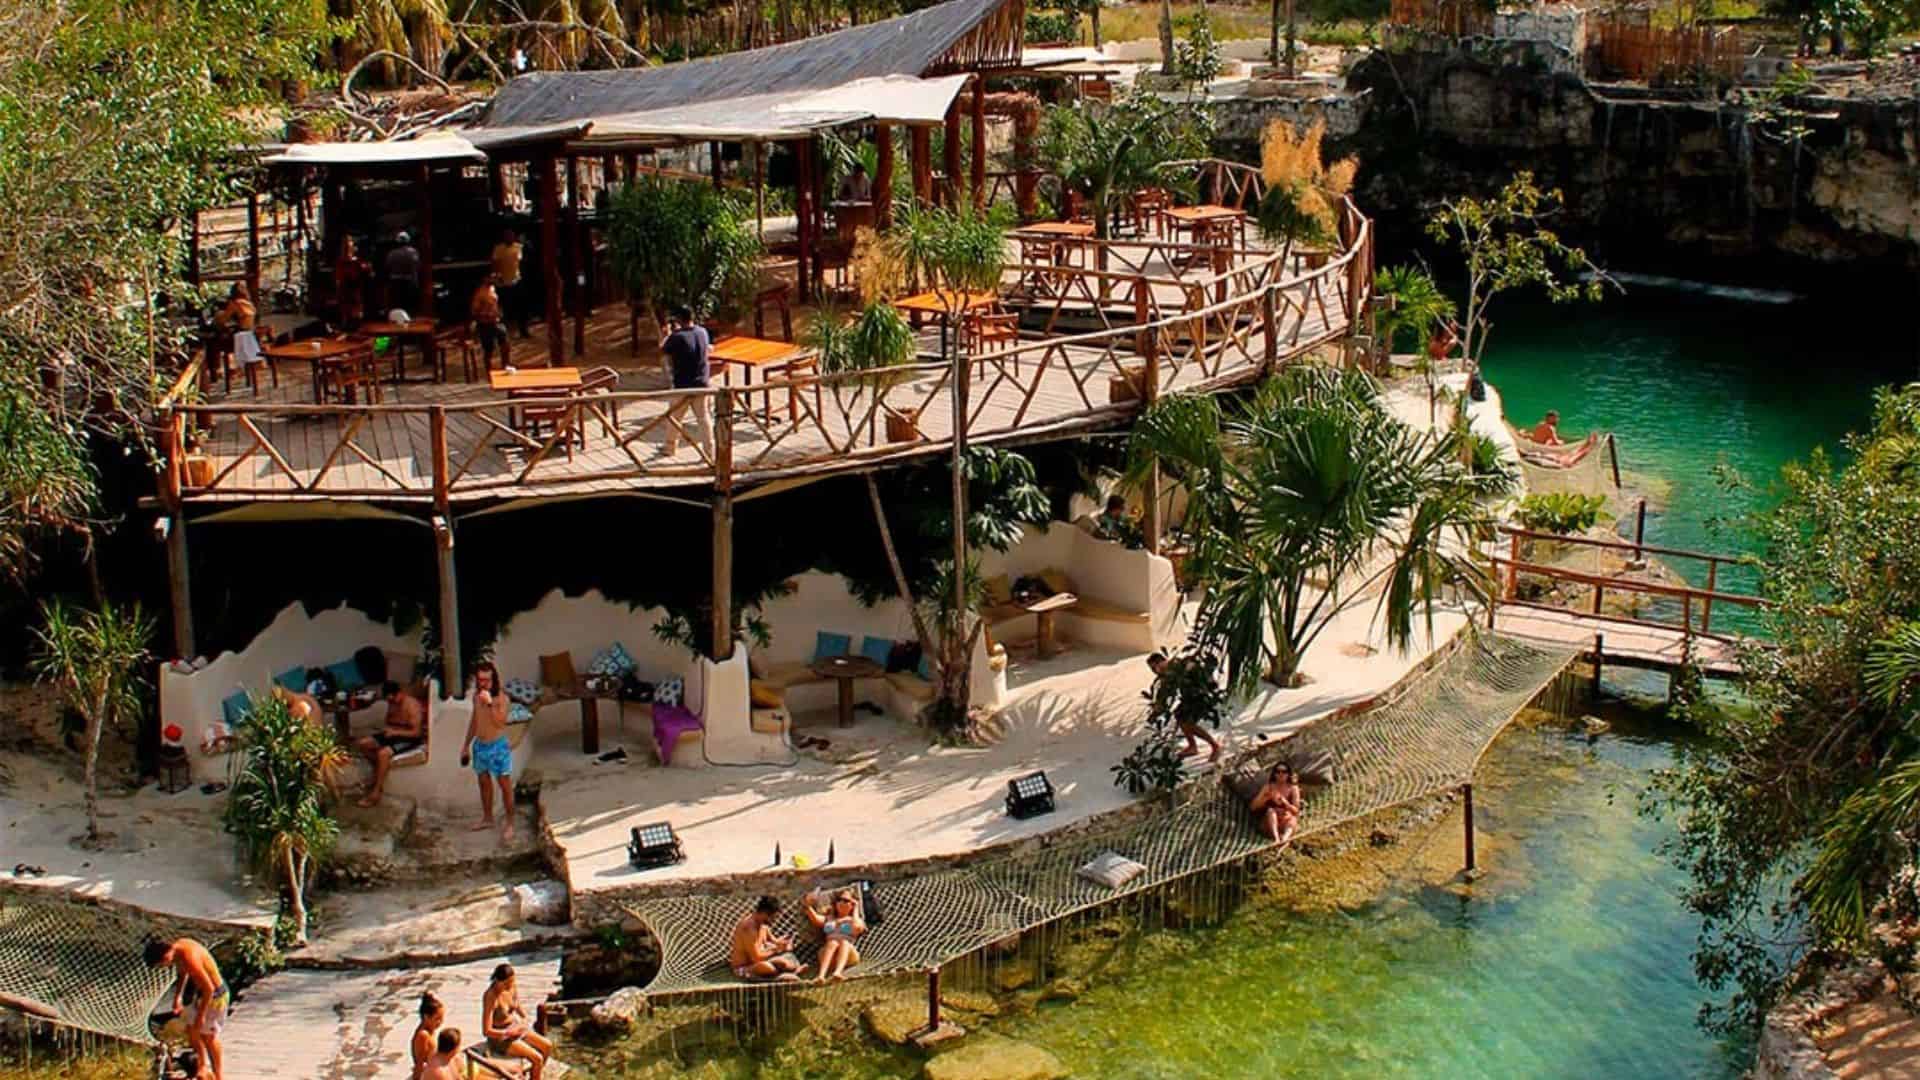 LOCUS set to return for second edition in Tulum with huge names in drum & bass